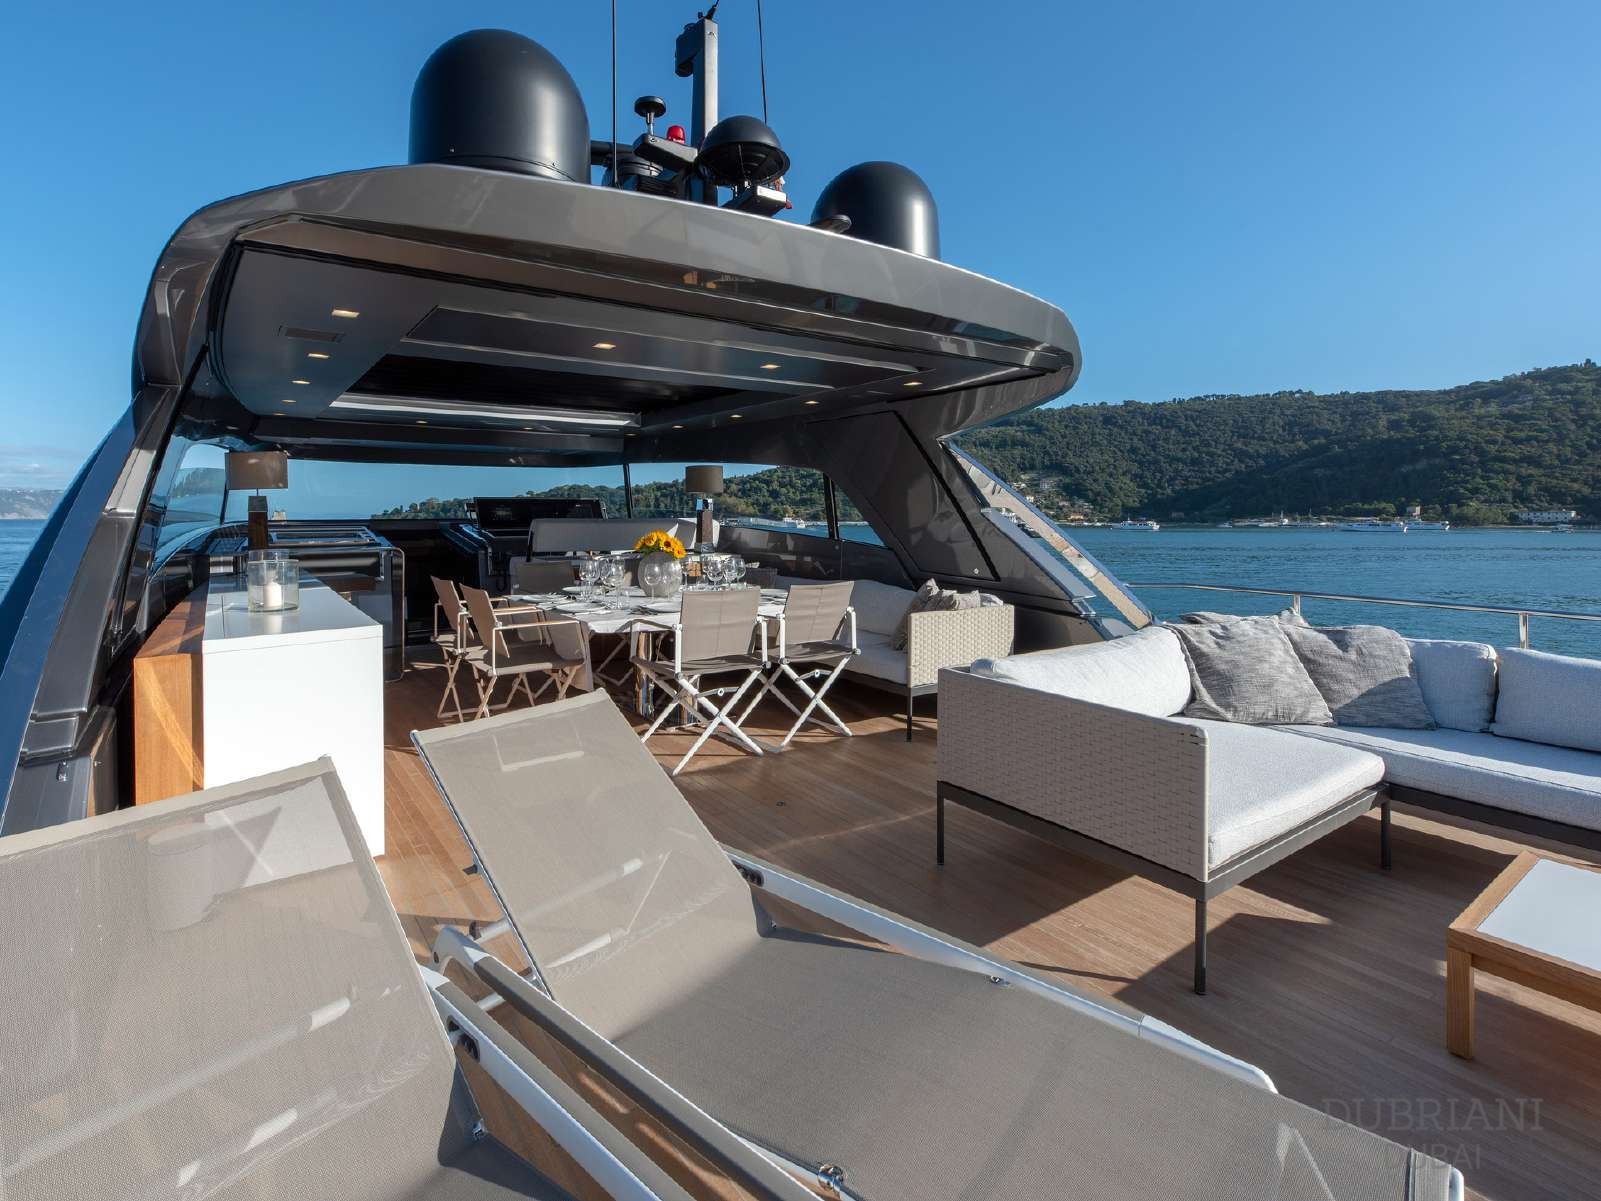 Guests relaxing on the comfortable deck of the San Lorenzo SX88."